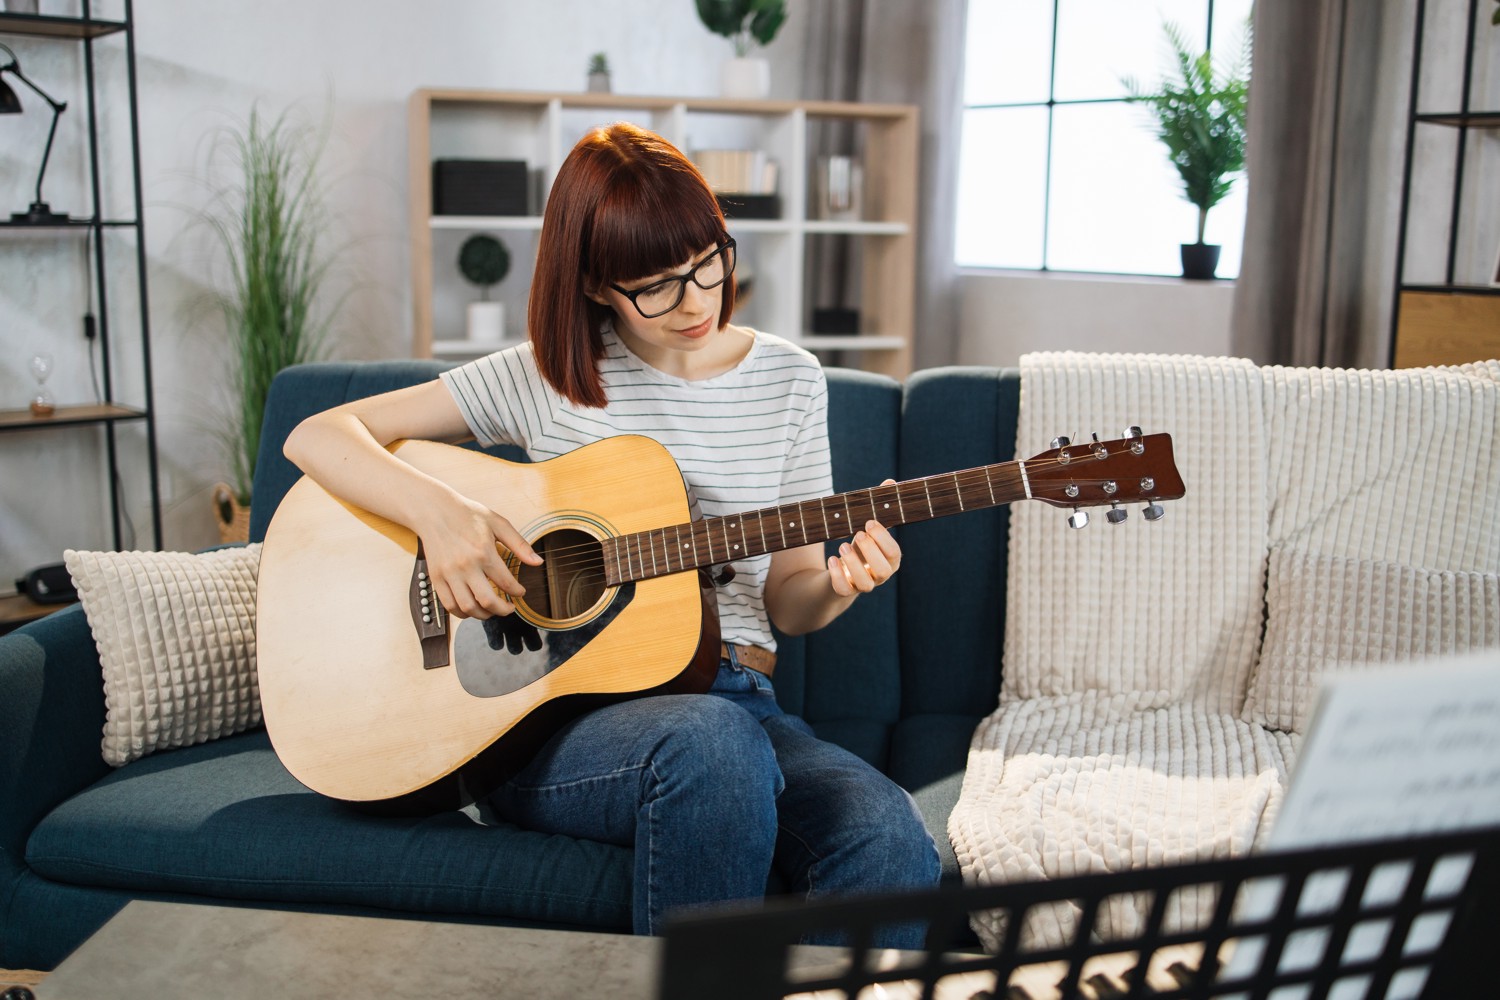 A Young Woman Learning to Play an Acoustic Guitar For Beginners at Home